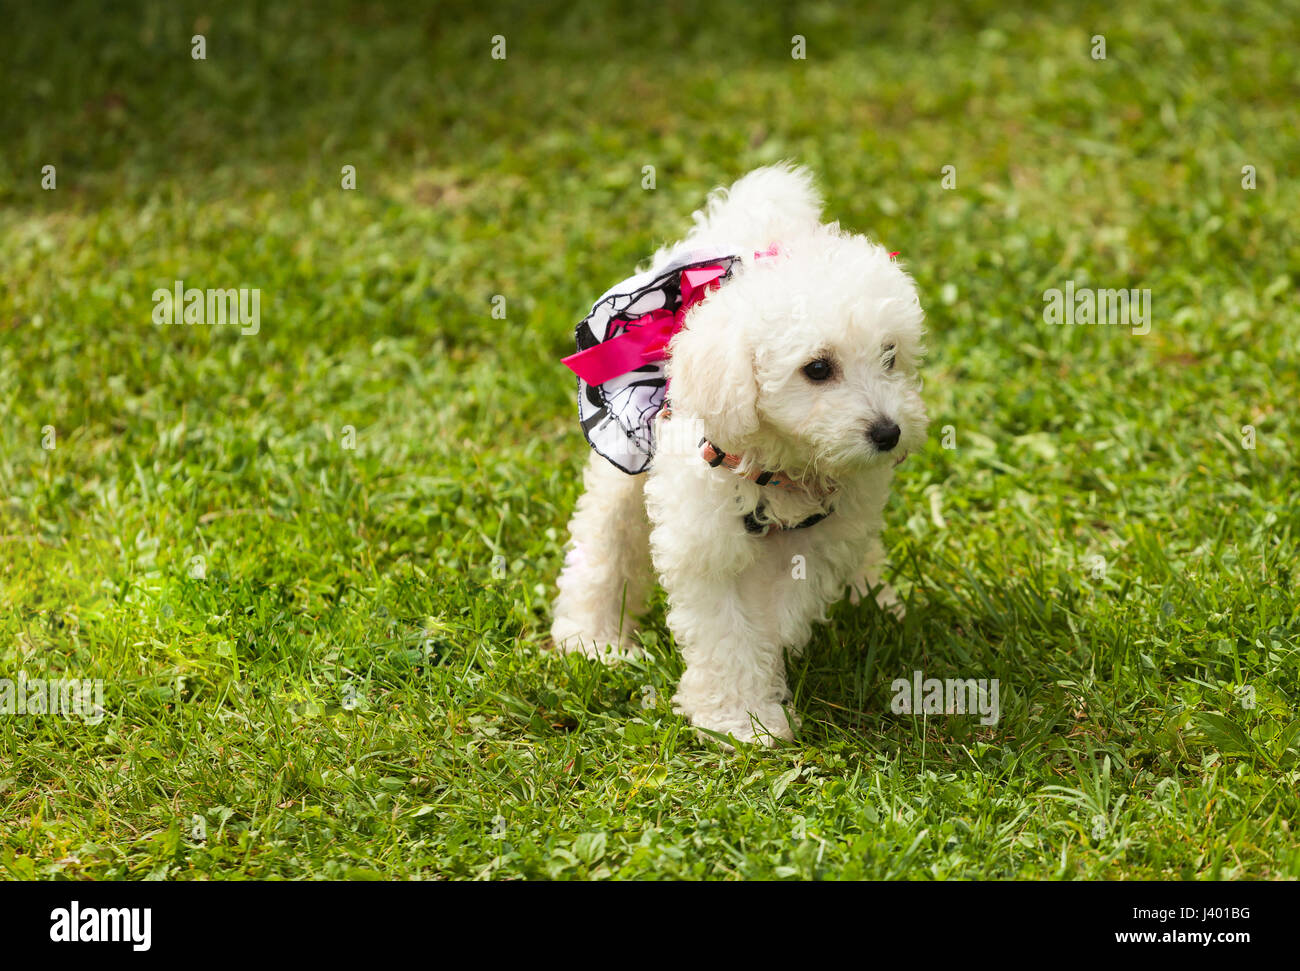 Cute small puppy poodle dog in green grass in the park. Stock Photo